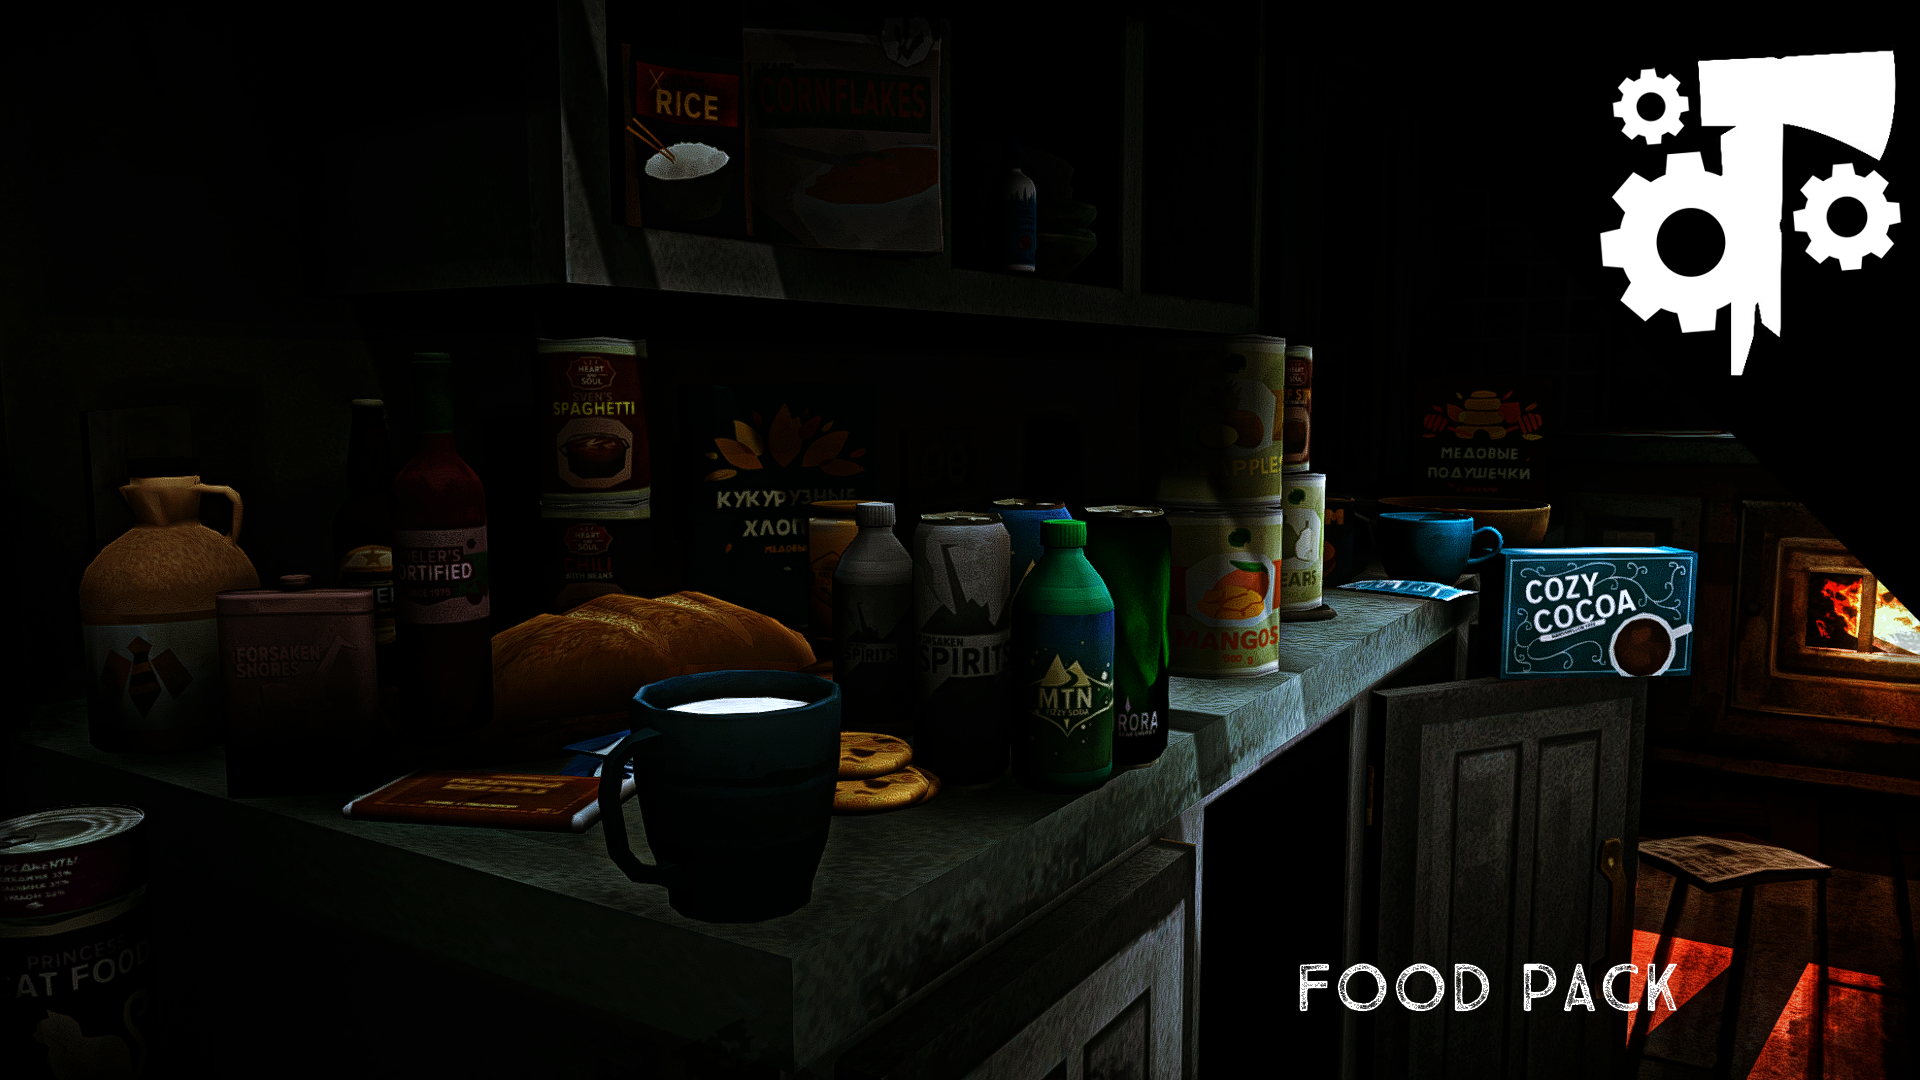 All food items